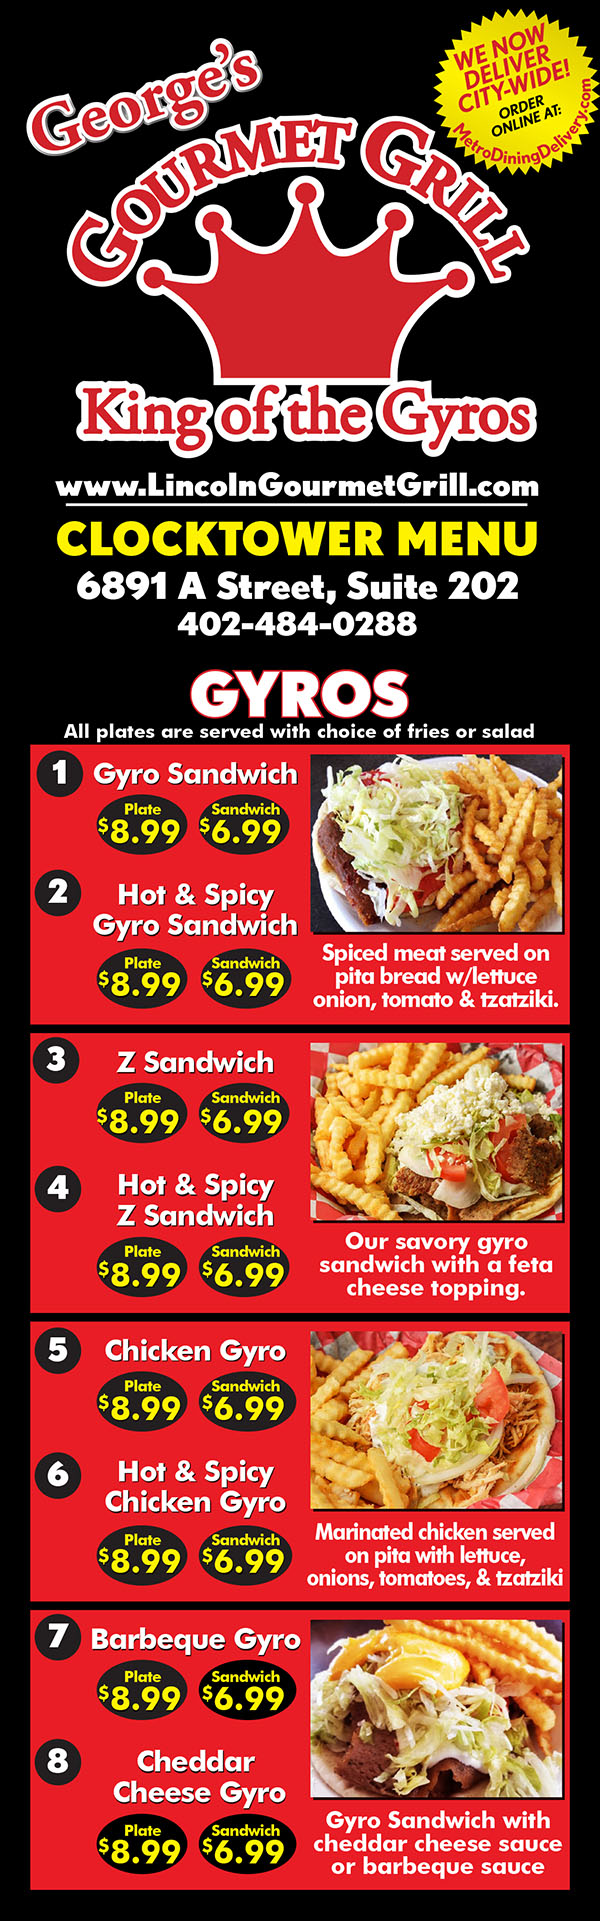 George's Gourmet Grill - King of the Gyros - Menu Lincoln Nebraska
www.LincolnGourmetGrill.com
CLOCKTOWER MENU
6891 A Street, Suite 202
402-484-0288
Open 7 Days a week. 10am-9pm
- Sandwiches -
Gyro Sandwich 6.41
Spiced meat served on pita bread with
lettuce onion, tomato, and tzatziki sauce.
Gyro Plate 8.16
With regular or steak fries
Hot & Spicy Gyro Sandwich 6.51
A spectacular kick to our already wonderful
sandwich.
Hot & Spicy Gyro Plate 8.19
With regular or steak fries
“Z” Sandwich 6.46
Our savory gyro sandwich with a feta
cheese topping.
“Z” Plate 7.85
With regular or steak fries
Hot & Spicy “Z” Plate 8.28
Spicy “Z” sandwich with choice of regular
or greek fries.
Cheddar Cheese Gyro Plate 8.20
Gyro Sandwich plate with cheddar cheese
With regular or steak fries
Barbecue Gyro Plate 8.24
Gyro Sandwich plate with barbecue sauce.
With regular or steak fries
Philly Steak Pita 7.78
Philly served on pita bread with tomato,
lettuce, sauteed onions, and cheese.
- BURGERS -
Cheeseburger & Fries 8.11
Cheese, Lettuce, Tomato, Onion,
Mayo & Pickles.
Gyro Burger & Fries 9.00
Burger topped with Gyro, Cheese, Lettuce,
Tomato,Onion, Mayo & Pickels.
- LIGHTER SIDE -
Gyros & Rice Plate 8.20
Gyro or Chicken Gyro with rice pilaf.
- SALADS -
Greek Salad 8.20
Lettuce, tomato, onion, feta cheese,
gyro meat, and tzatziki sauce.
Chicken Salad 8.20
Lettuce, tomato, onion, feta cheese,
and grilled chicken.
- SEAFOOD -
Fish Sandwich & Fries 6.78
3 pc. Fish Fillets & Fries 7.10
4 pc. Fish Strip & Fries 7.80
Shrimp Basket 6.60
- Vegetarian -
Vegetarian Sandwich & Fries 6.41
Lettuce, tomato, onion, feta cheese,
tzatziki sauce & choice of fries.
Spanakopita Plate 7.78
Spinach, feta cheese, baked in a flaky
dough served with fries and salsa
Falafel Sandwich 6.41
Veggie patty served on pita bread with
tomatoes, onion, topped with sauce.
Falafel Plate 8.14
With regular or steak fries
Hummus Sandwich 6.41
Ground chick peas served with pita bread,
fries and salad
- CHICKEN -
Chicken Gyro 6.49
Marinated chicken, served on pita with
lettuce, onions,tomatoes, & tzatziki sauce.
Chicken Gyro Plate 8.24
Hot & Spicy Chicken Gyro 6.49
A spectacular kick to our already wonderful
chicken gyro sandwich.
Hot & Spicy Chicken Plate 8.24
Hot & Spicy Grilled Chicken w/cheese 5.99
Hot & spicy marinated chicken grilled
& served with cheese.
Grilled Chicken Sandwich 5.50
Breaded Chicken Sandwich 5.99
Chicken Kabob 9.99
Marinated chicken served with pita bread
(or rice) fries, and salad.
Greek Chicken (Wednesday’s Only)
1pc 6.99 / 2pc 8.99
Large piece/s of greek style chicken
marinated in authentic greek spices,
served with bread & salad & fries
Chicken Wings 8.99
Breaded chicken wings with fries
4 pc. Chicken Strip & Fries 7.78
Chicken Nuggets & Fries 6.41
Tandoori Chicken Kabob 9.99
- Side Orders -
Mozzarella Sticks 4.75
Breaded Mushrooms 4.75
Corn Nuggets 4.75
Onion Petals 4.75
Greek Steak Fries 3.58
French Fries SM 2.29 LG 3.25
Rice 1.99 Pita Bread .99
Tzatziki Sauce .60 Jalapeno .60
Ranch .60 Baklava 1.78
Cookies 1.99 Lentil Soup 2.99
- Kids Meal -
Chicken Nuggets or Strips 6.41
Includes fries & drink
- Beverages -
Fountian Soda, Ice Tea,
Lemonade & Coffee
Small 1.59 - Med & Lg 1.99
- Refill $.50
Gatorade (all flavors) $1.89
Red Bull Energy Drink $1.89
Sobe Drink $2.72
We Now Deliver City-Wide!
Fast Delivery - Order Online @
MetroDiningDelivery.com
Metro
Dining
Delivery.com
Restaurant Delivery Service
Order
Relax
Eat
Get Georges Gourmet Grill Clocktower delivery! Order online with Metro Dining Delivery and get great gyros and more from George's Gourmet Grill delivered to your home or office FAST.
